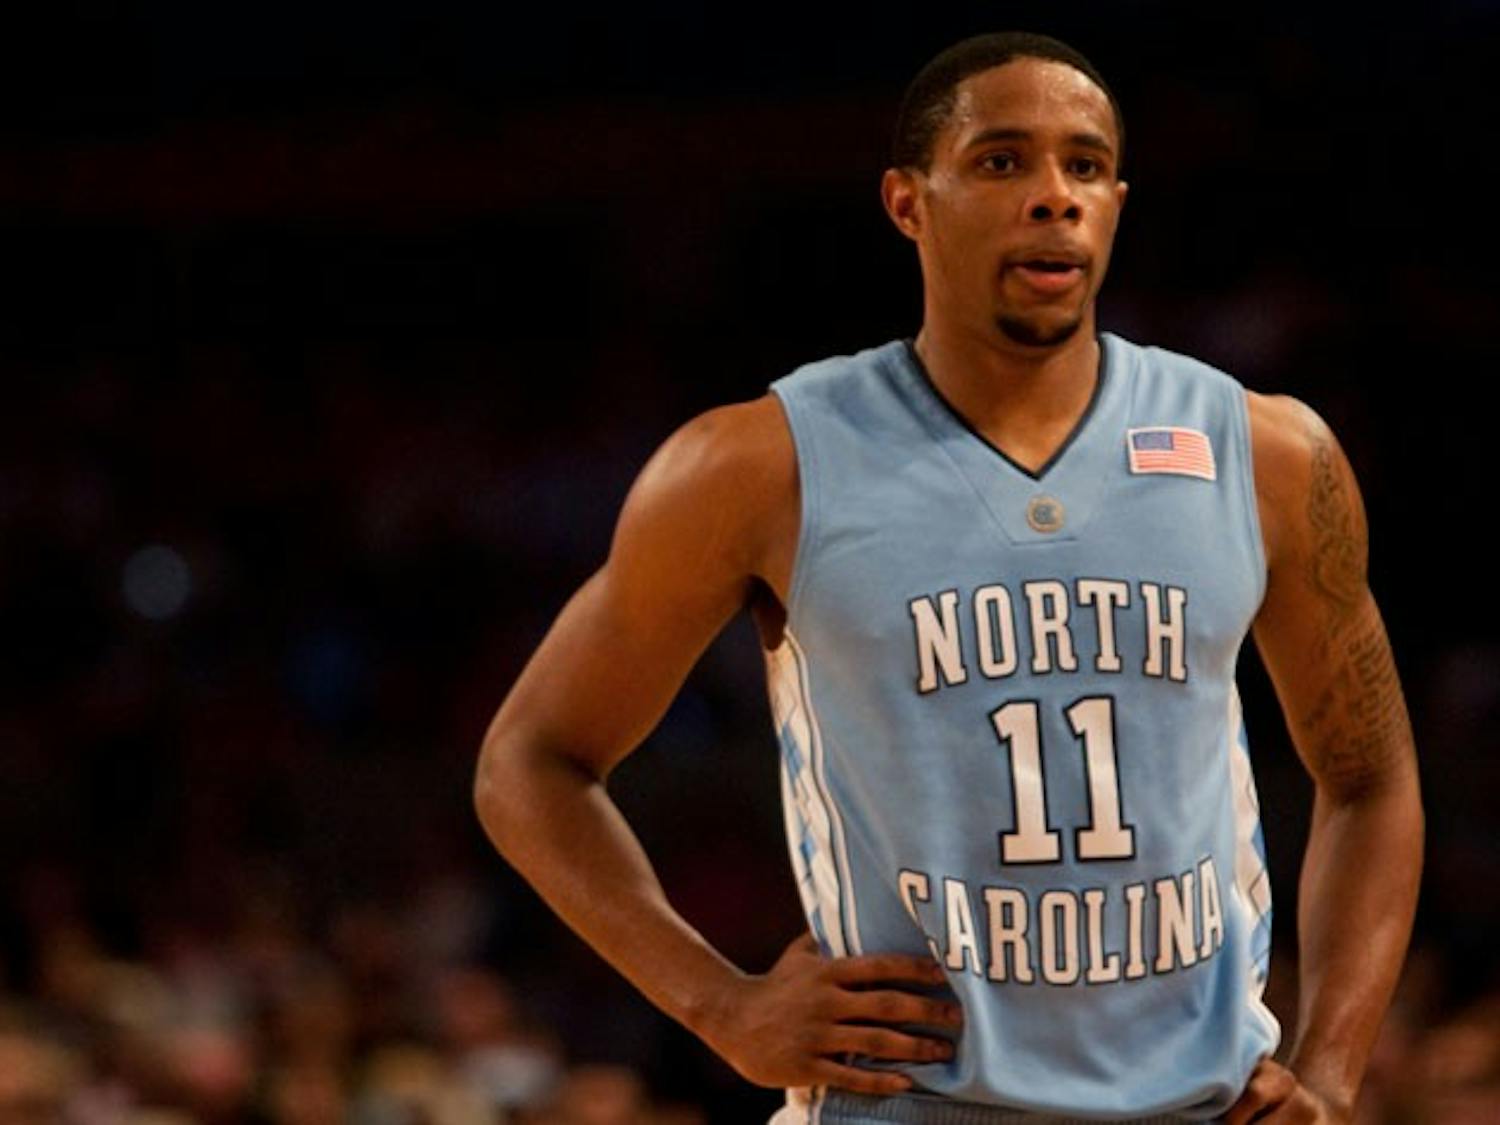 Larry Drew II, whose clutch play in past NIT games moved UNC forward, couldn't help the team Thursday. DTH/Katherine Vance